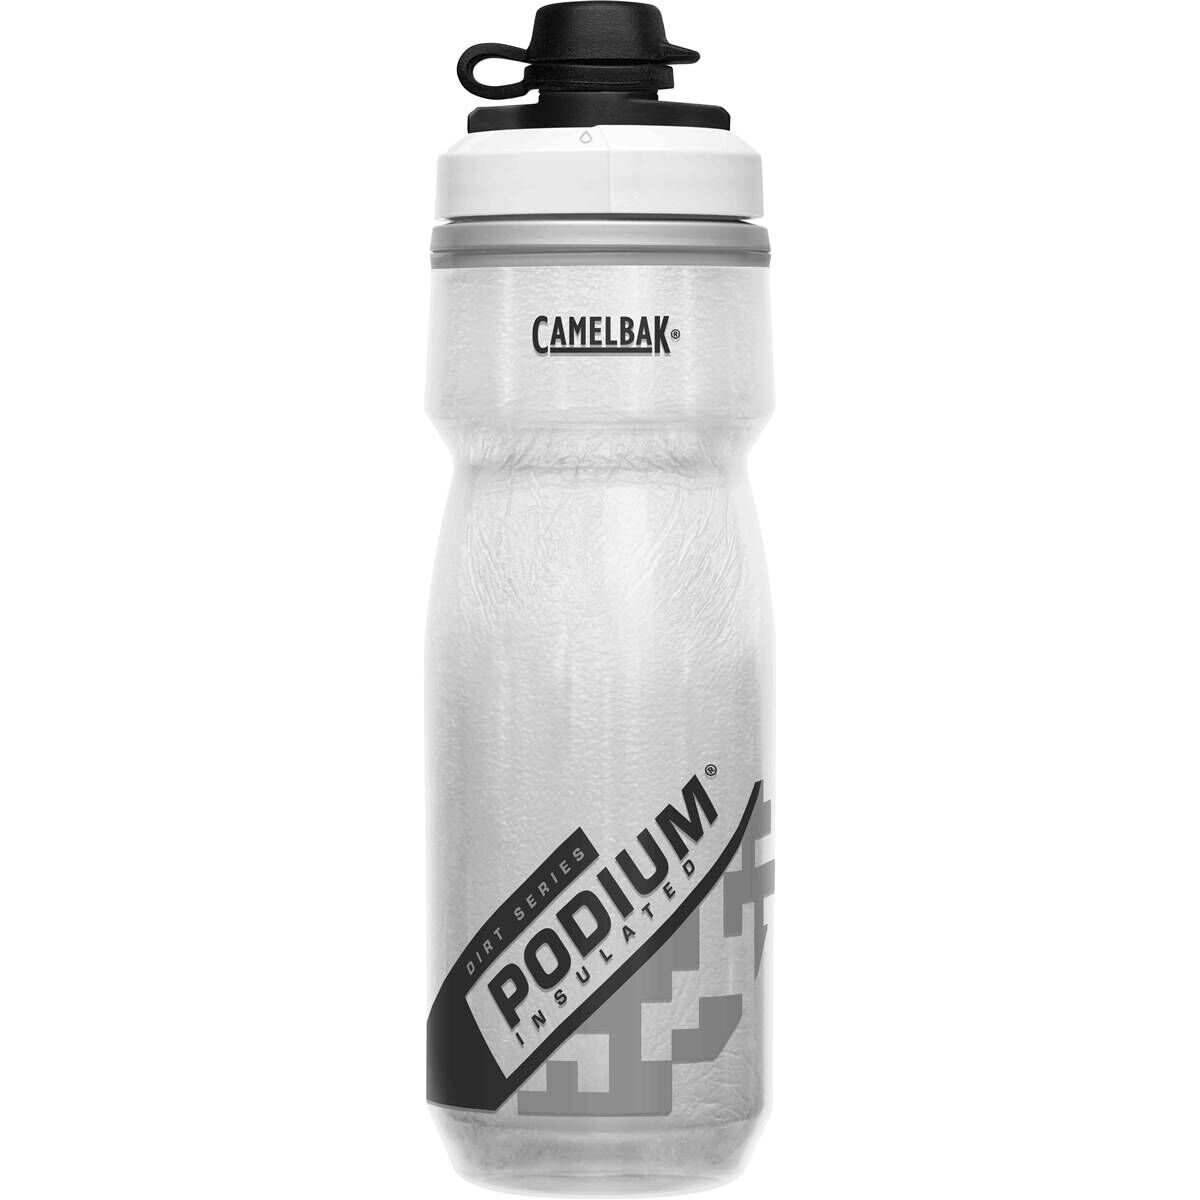 Camelbak Podium Dirt Series Chill 0.6L - Cycling water bottle | Hardloop